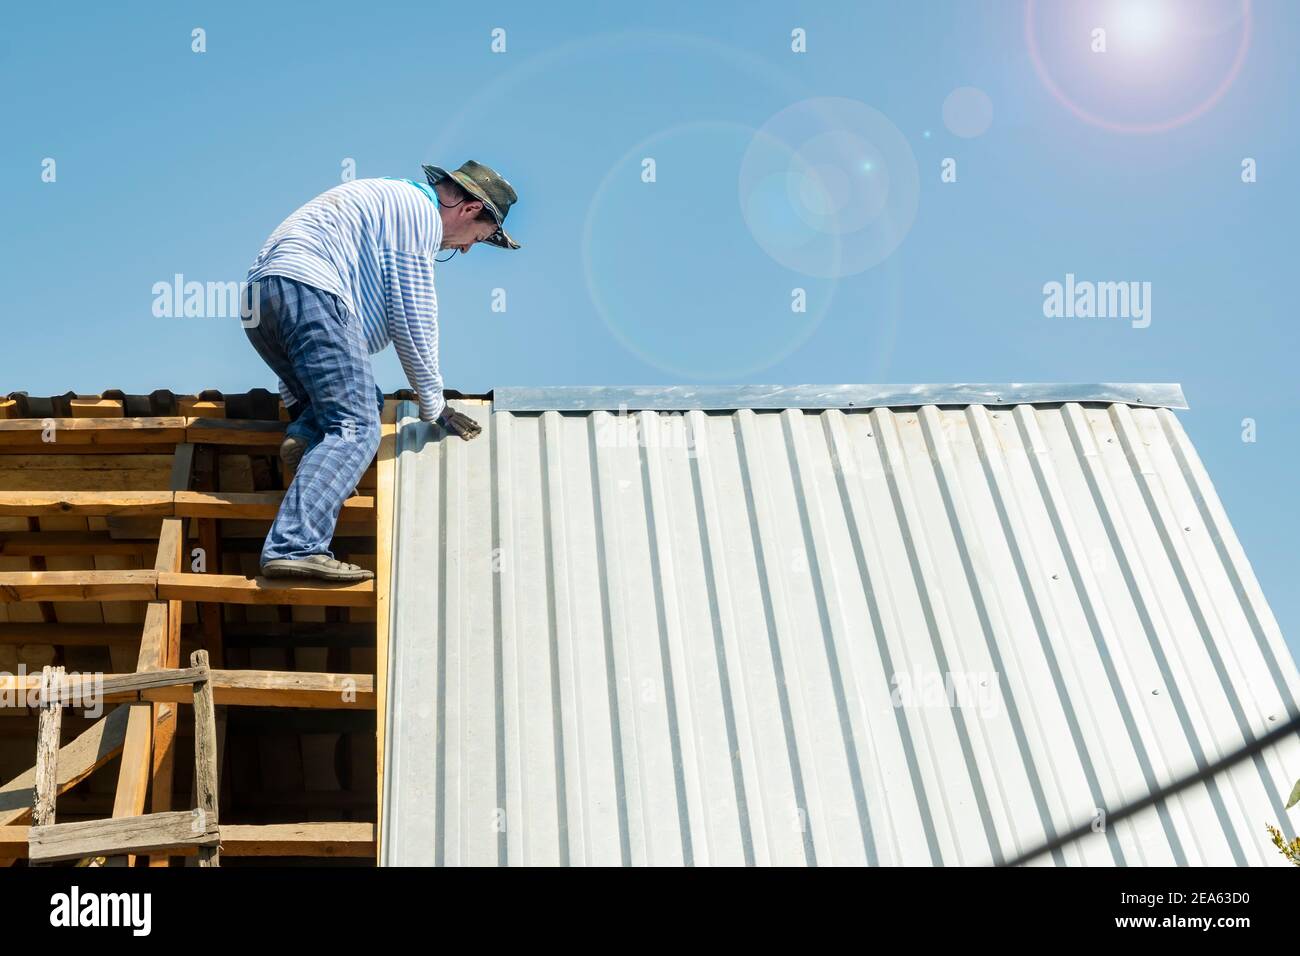 carpenter repairs the roof of the house, attaches metal galvanized sheets in hot weather in the bright sun Stock Photo